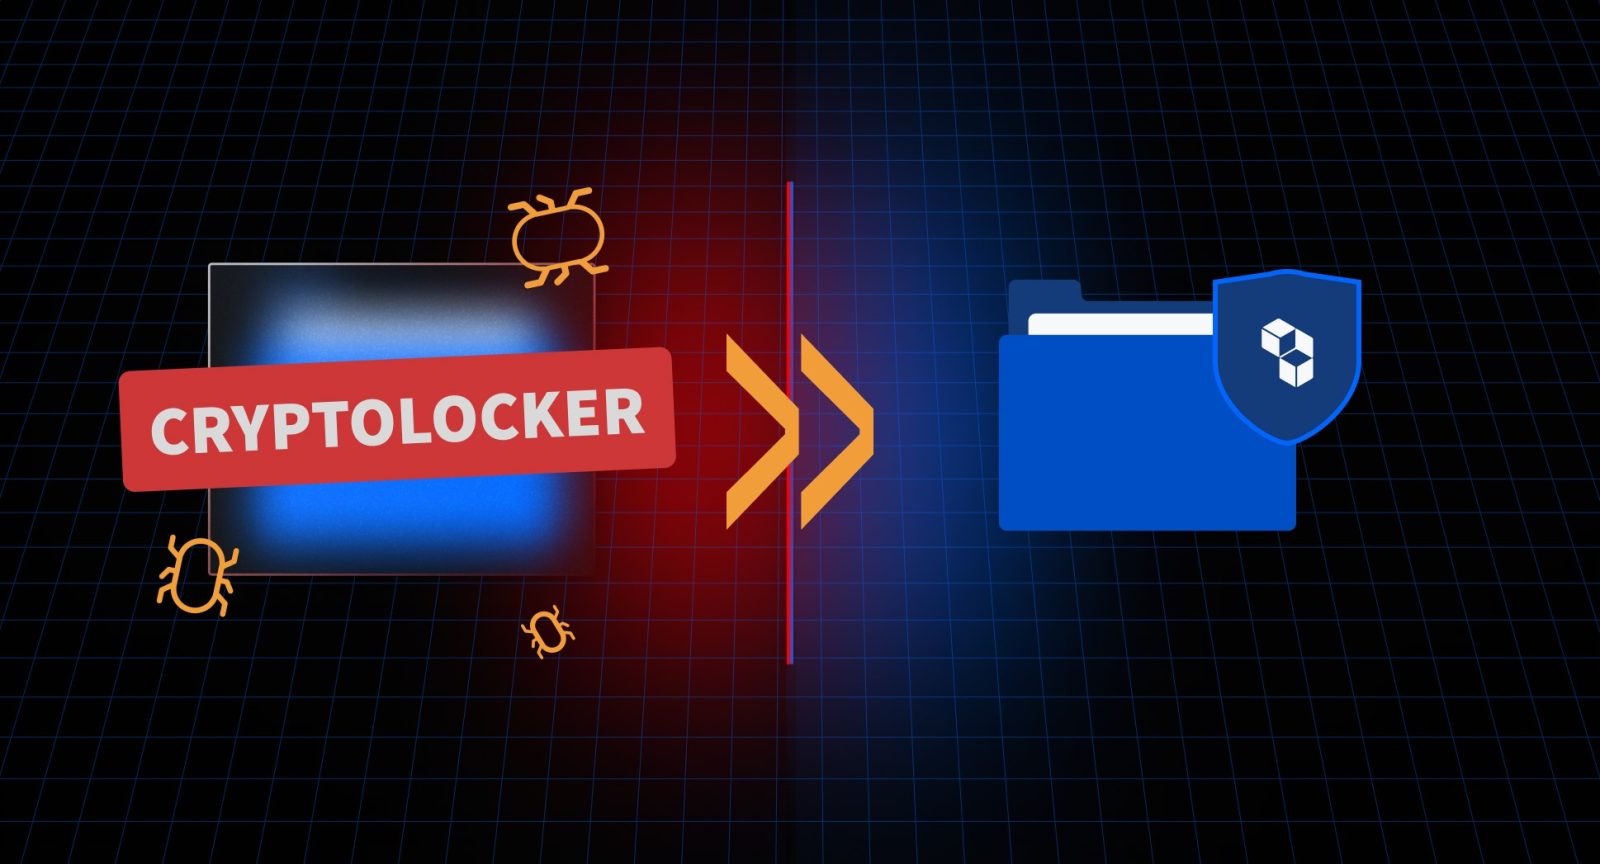 Ransomware CryptoLocker: what it is and how to really protect yourself